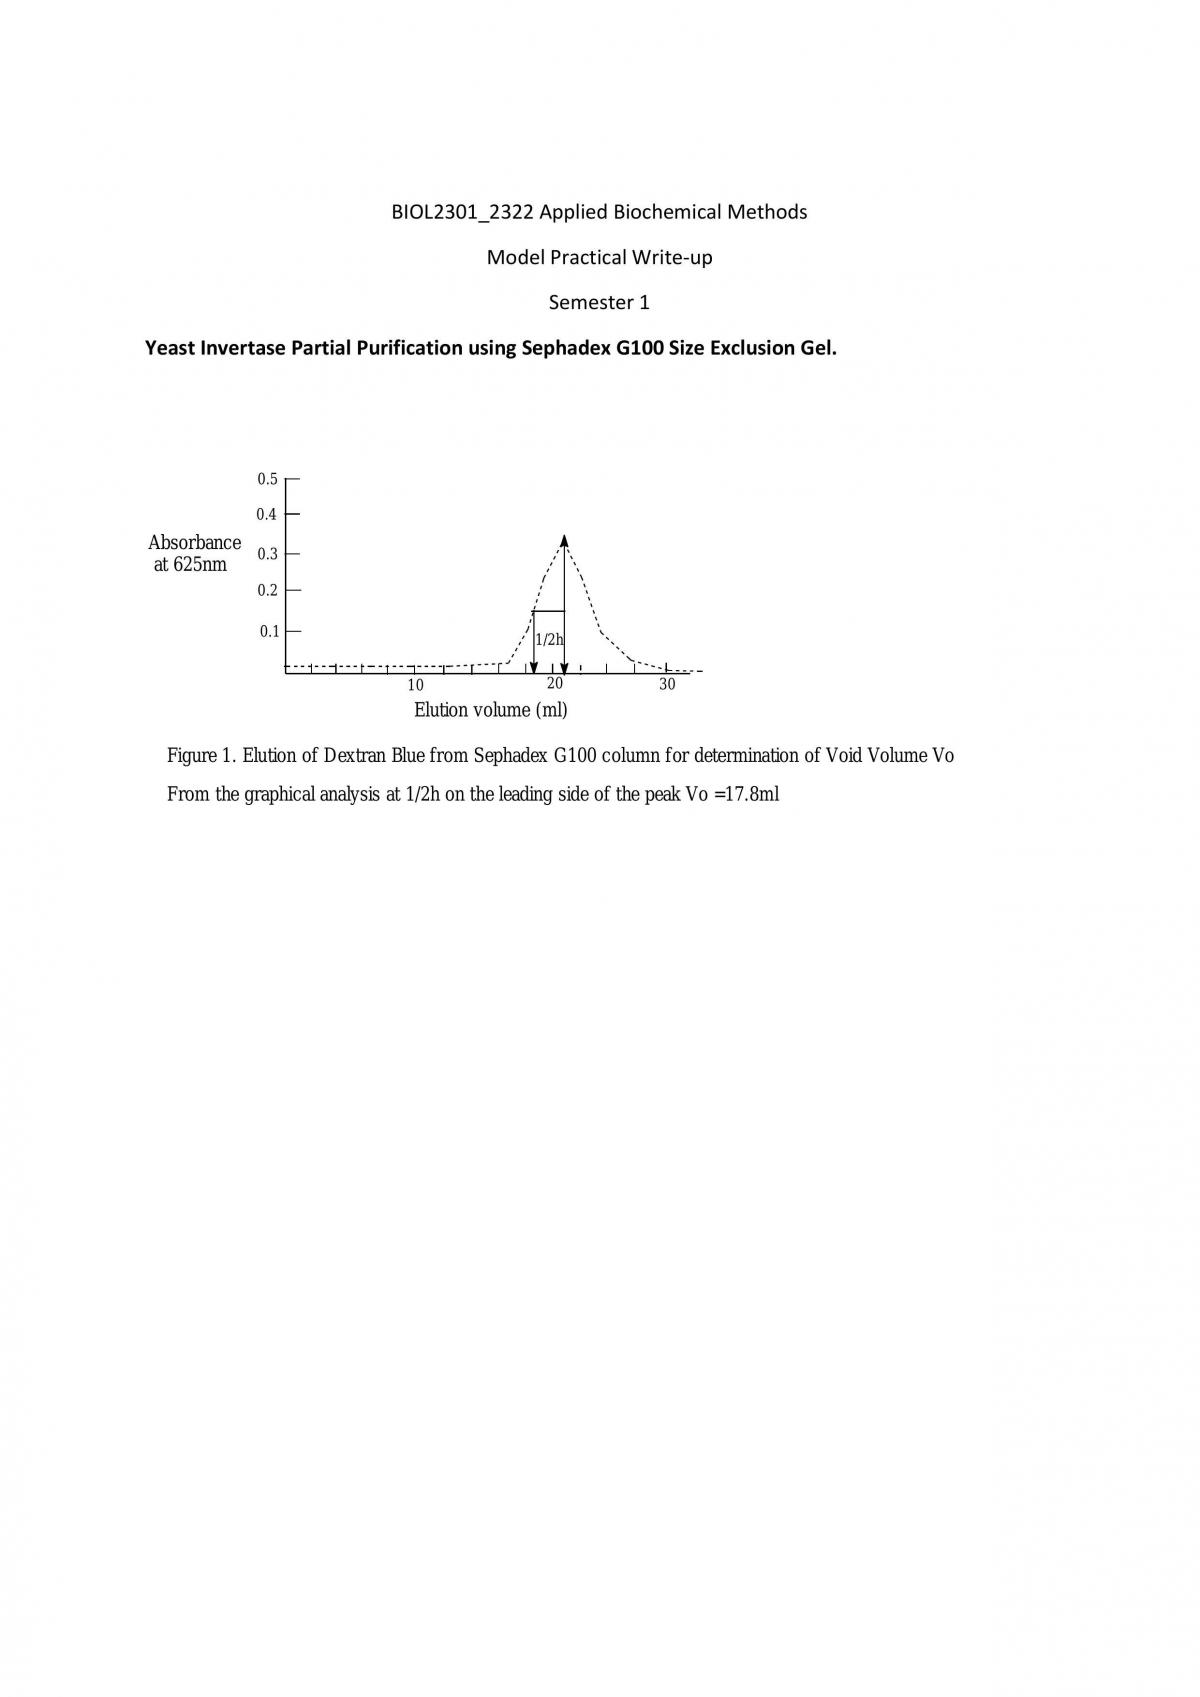 Size Exclusion Chromatography Using Sephadex Gel to Isolate Yeast Invertase - Page 1